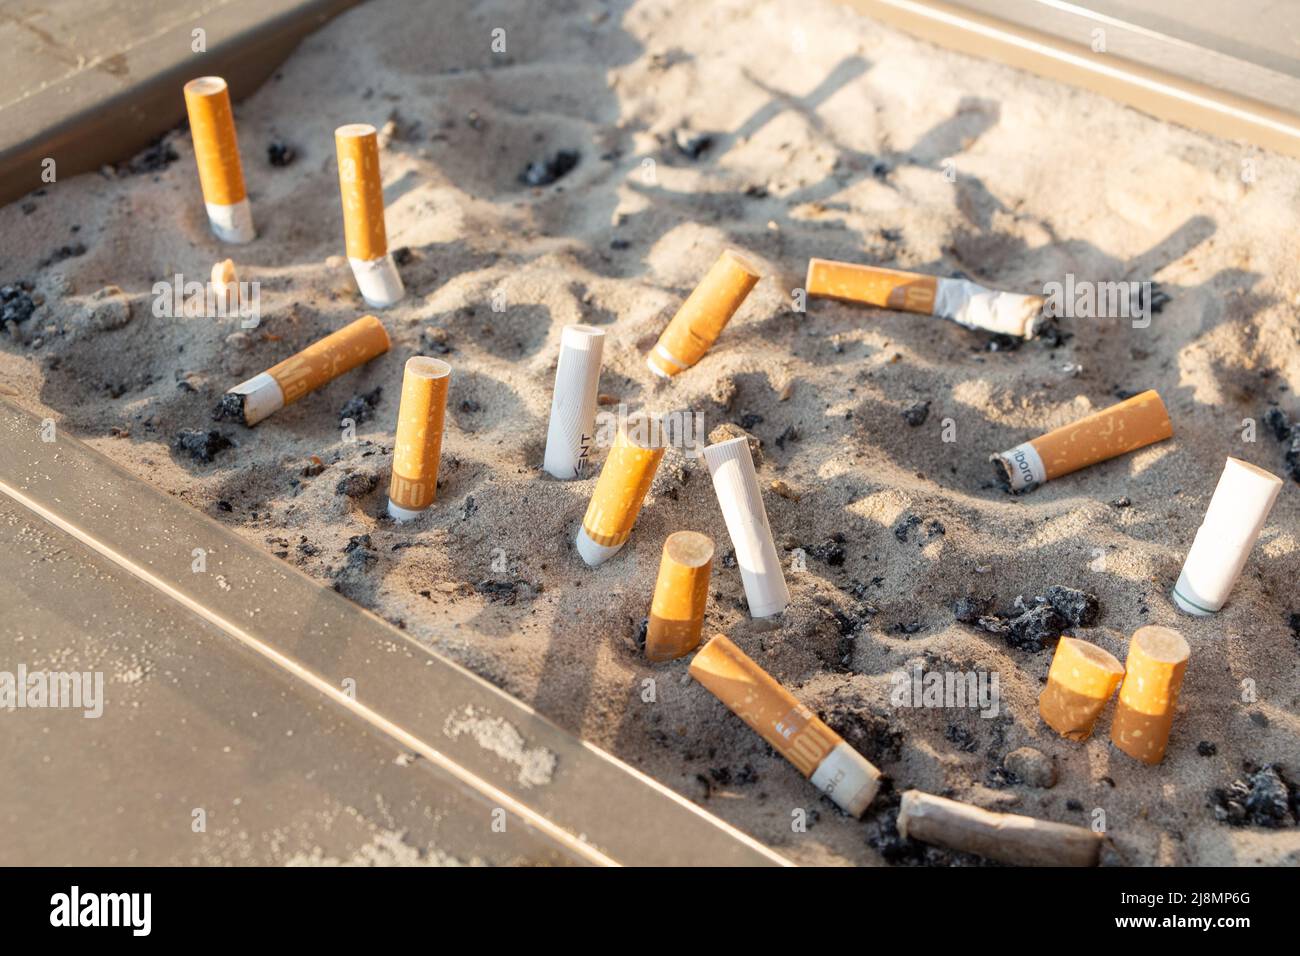 Paris – France, August 19,2018 : Cigarette butts in an ashtray with sand Stock Photo